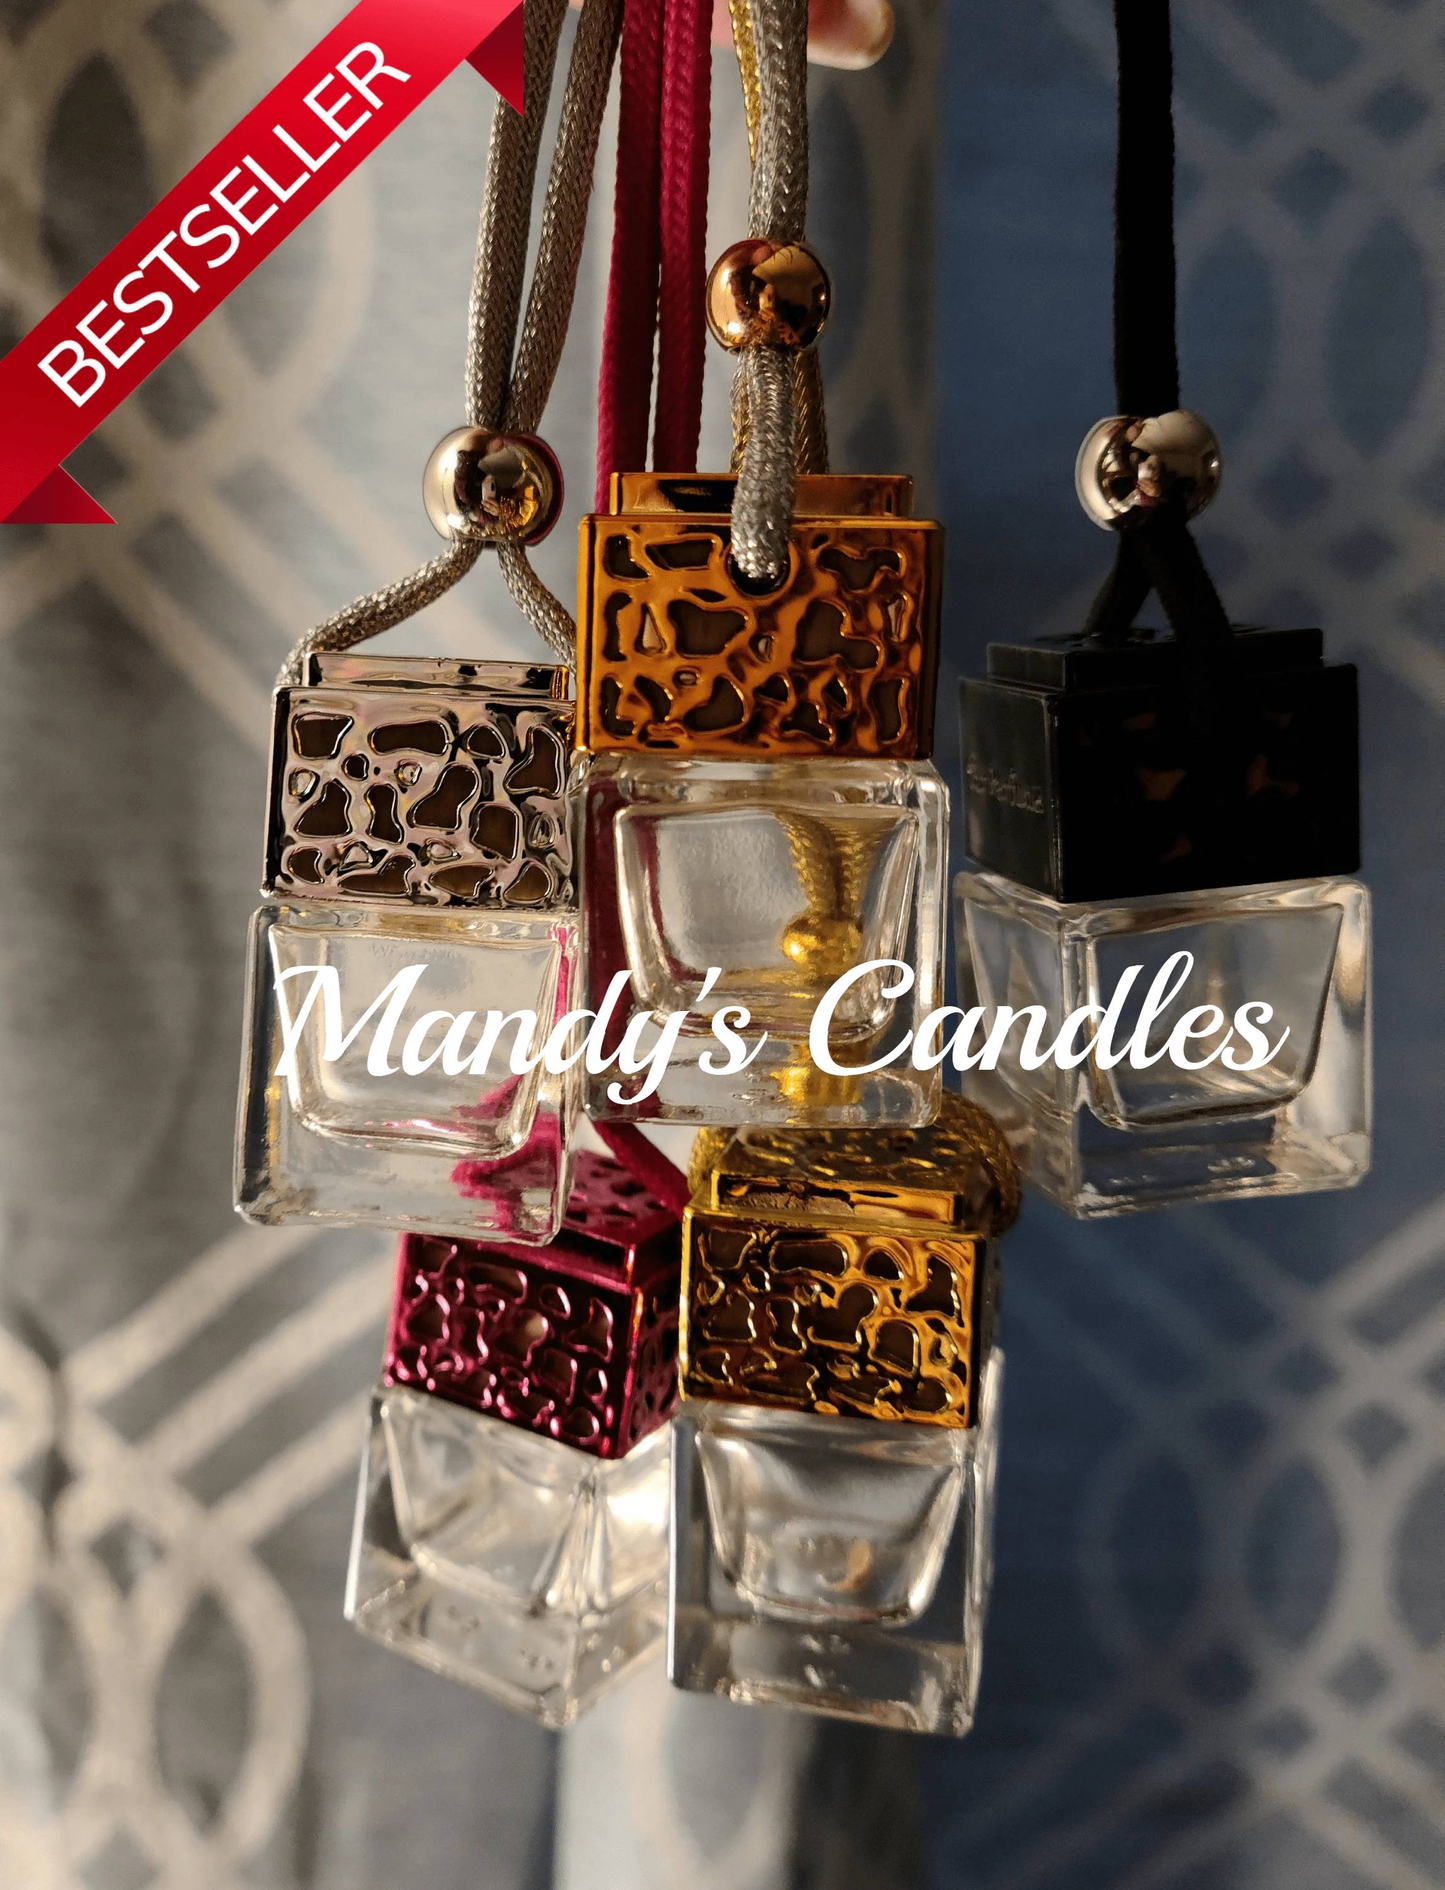 Elegant Rose Gold Car Air Fresheners. - Mandy's Handcrafted Candles